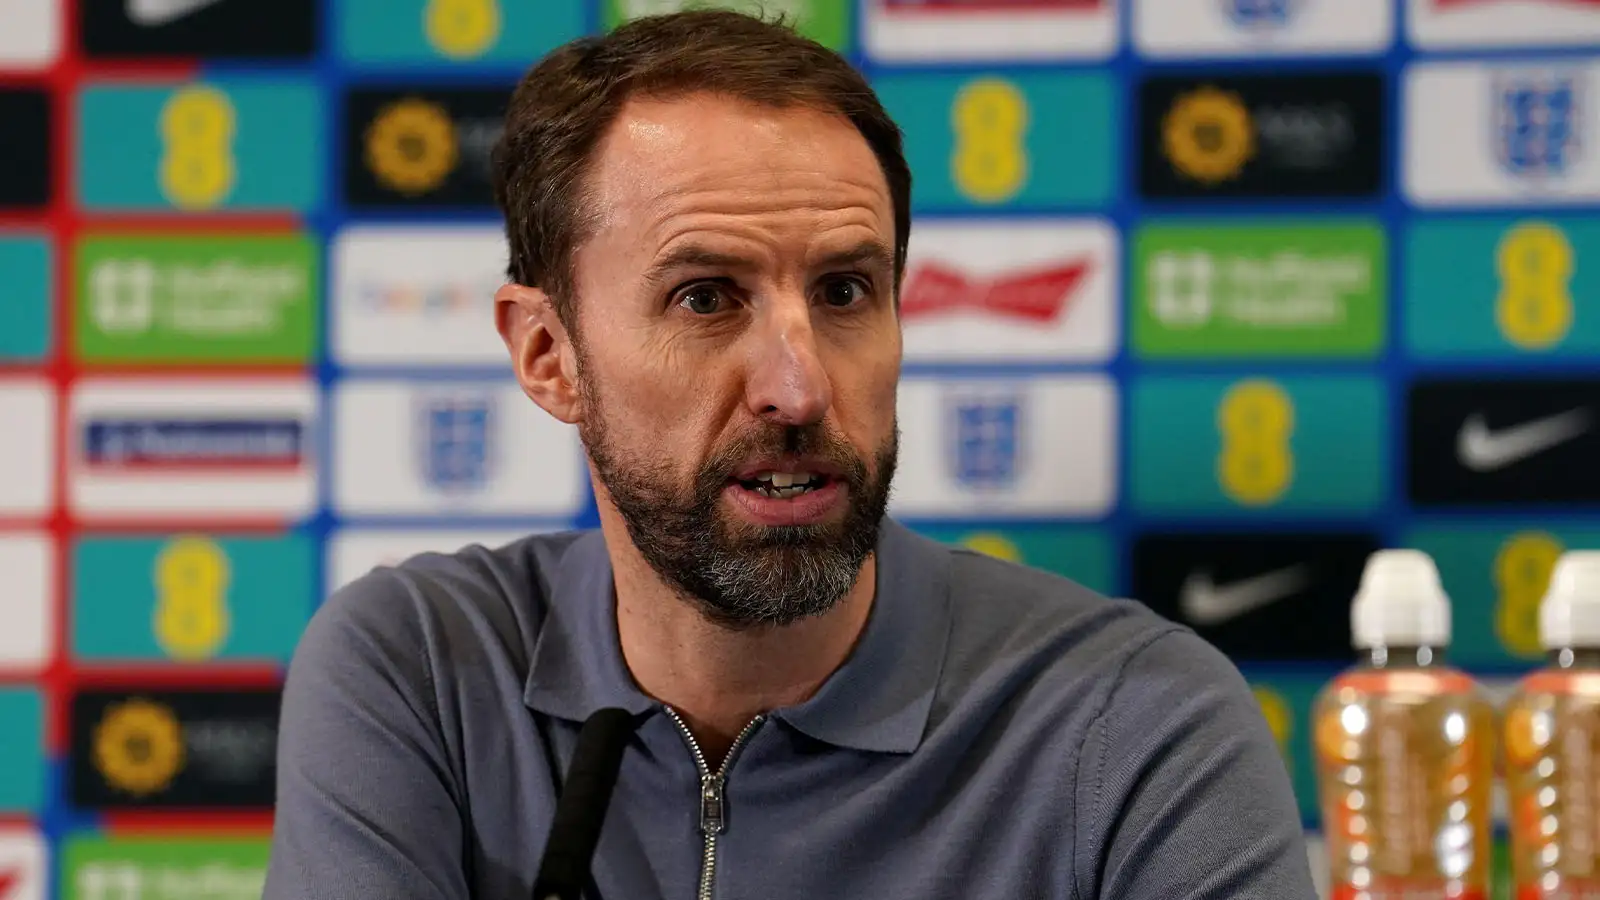 England manager Gareth Southgate during a press conference to announce the squad for the upcoming UEFA EURO 2024 qualifying matches against Italy and Ukraine, at St. George's Park, Burton upon Trent.